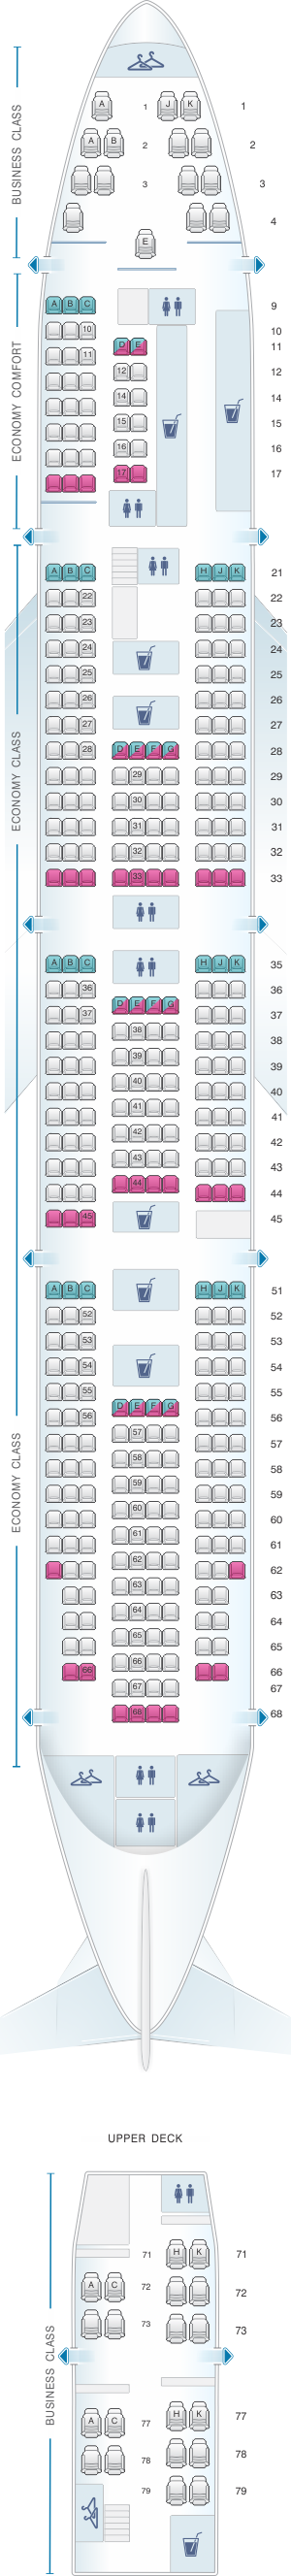 Klm Boeing Seat Map Hot Sex Picture